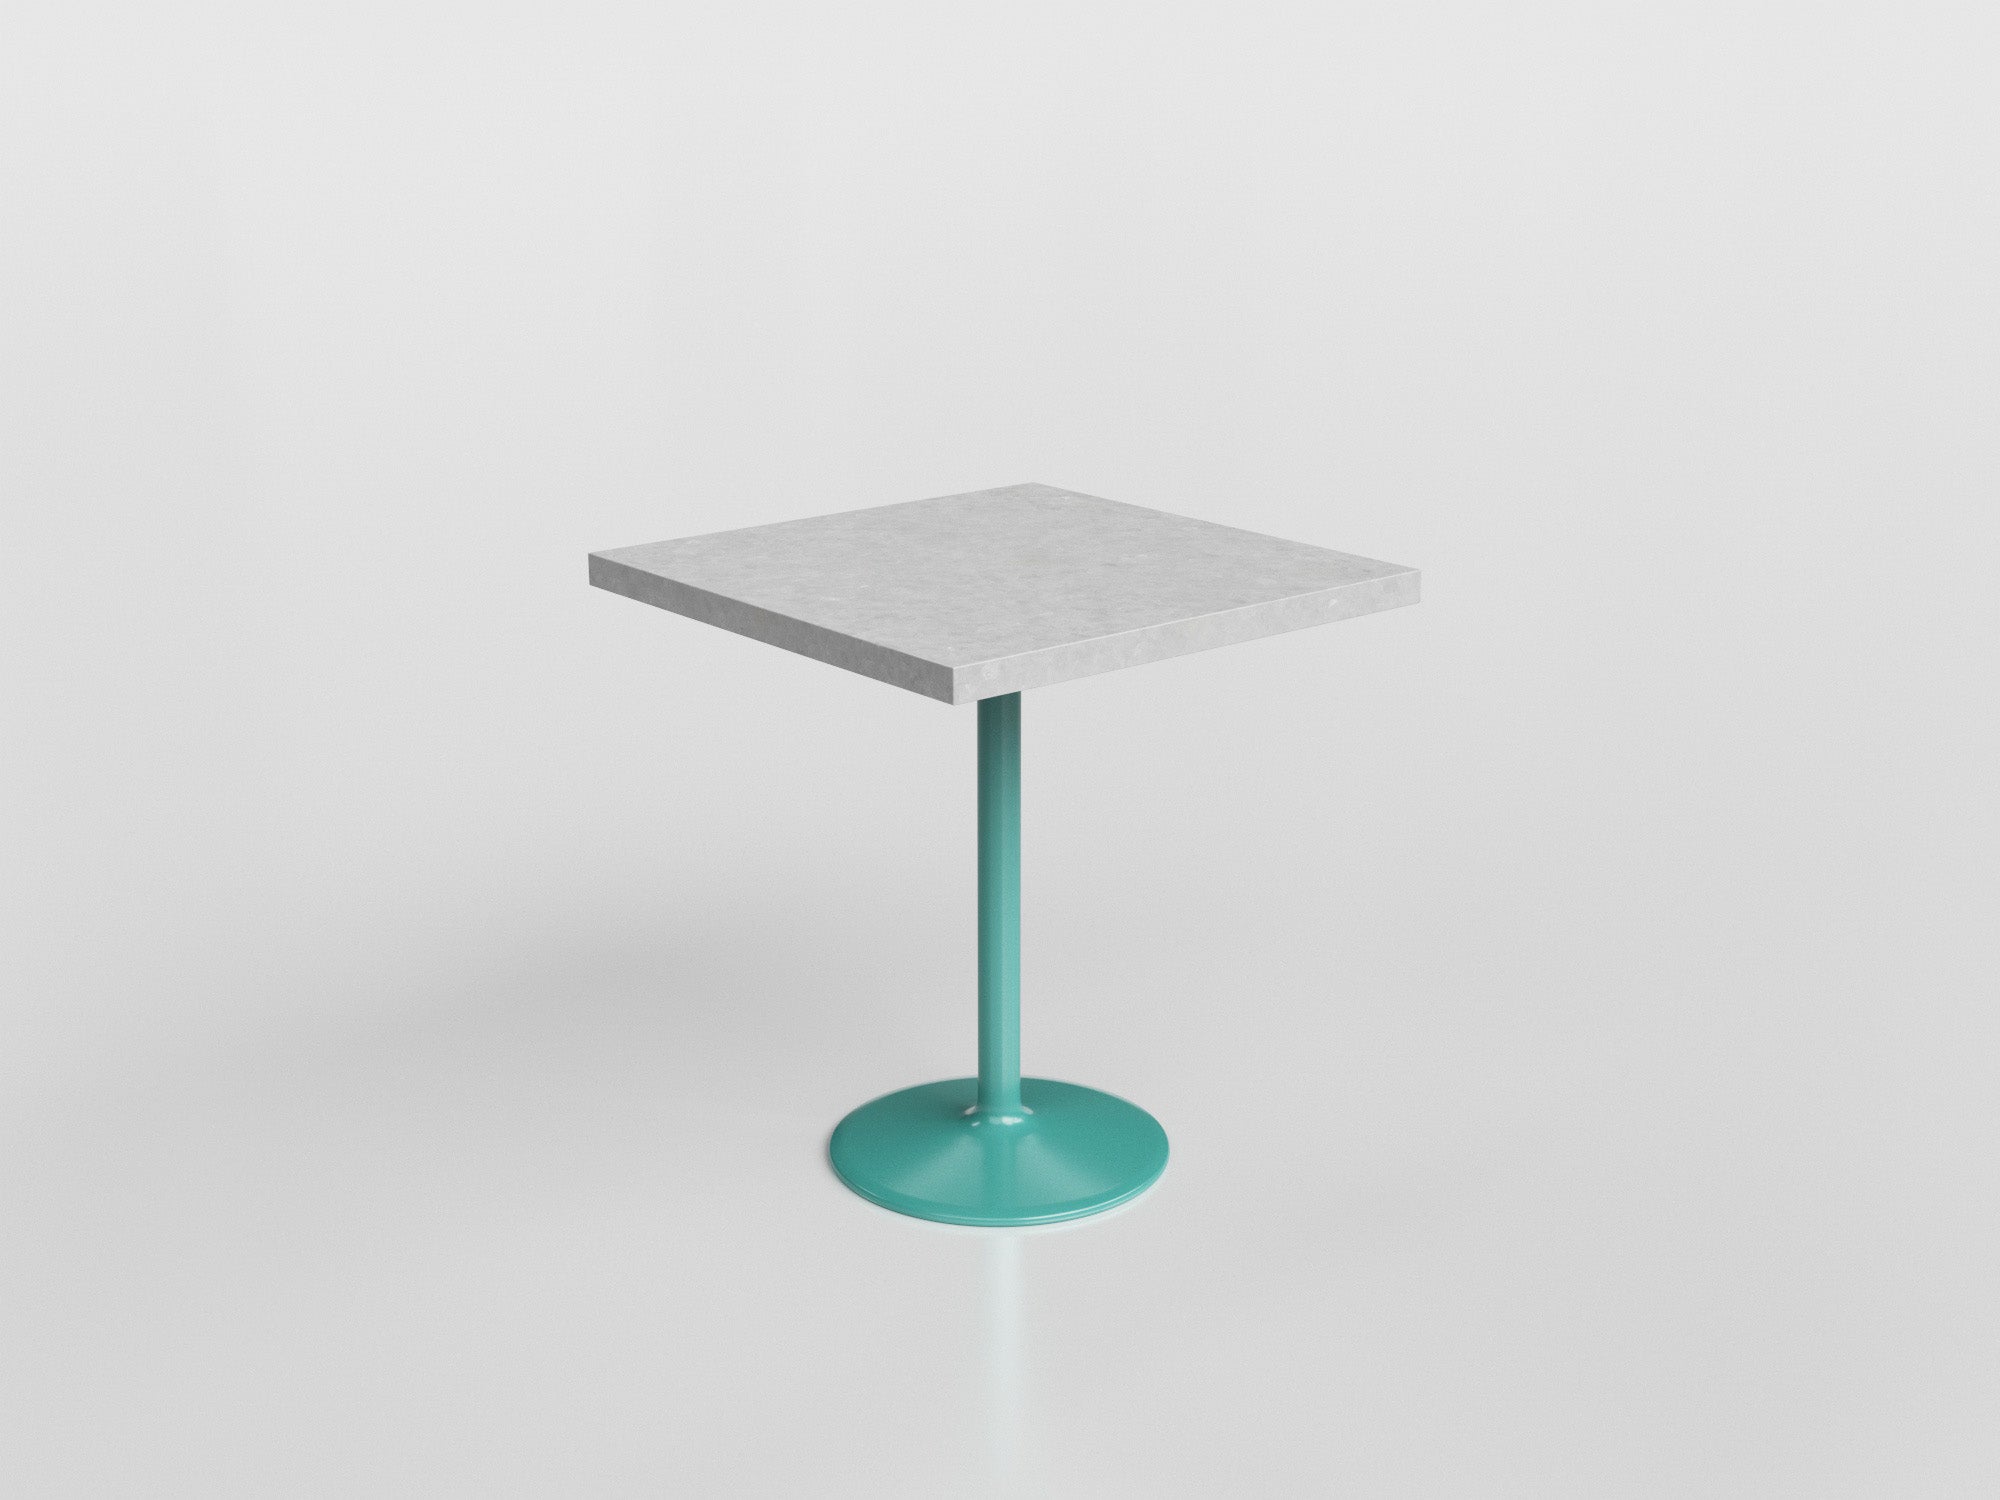 Goa Table Base Square with turquoise aluminium base and stone top, designed by Luciano Mandelli